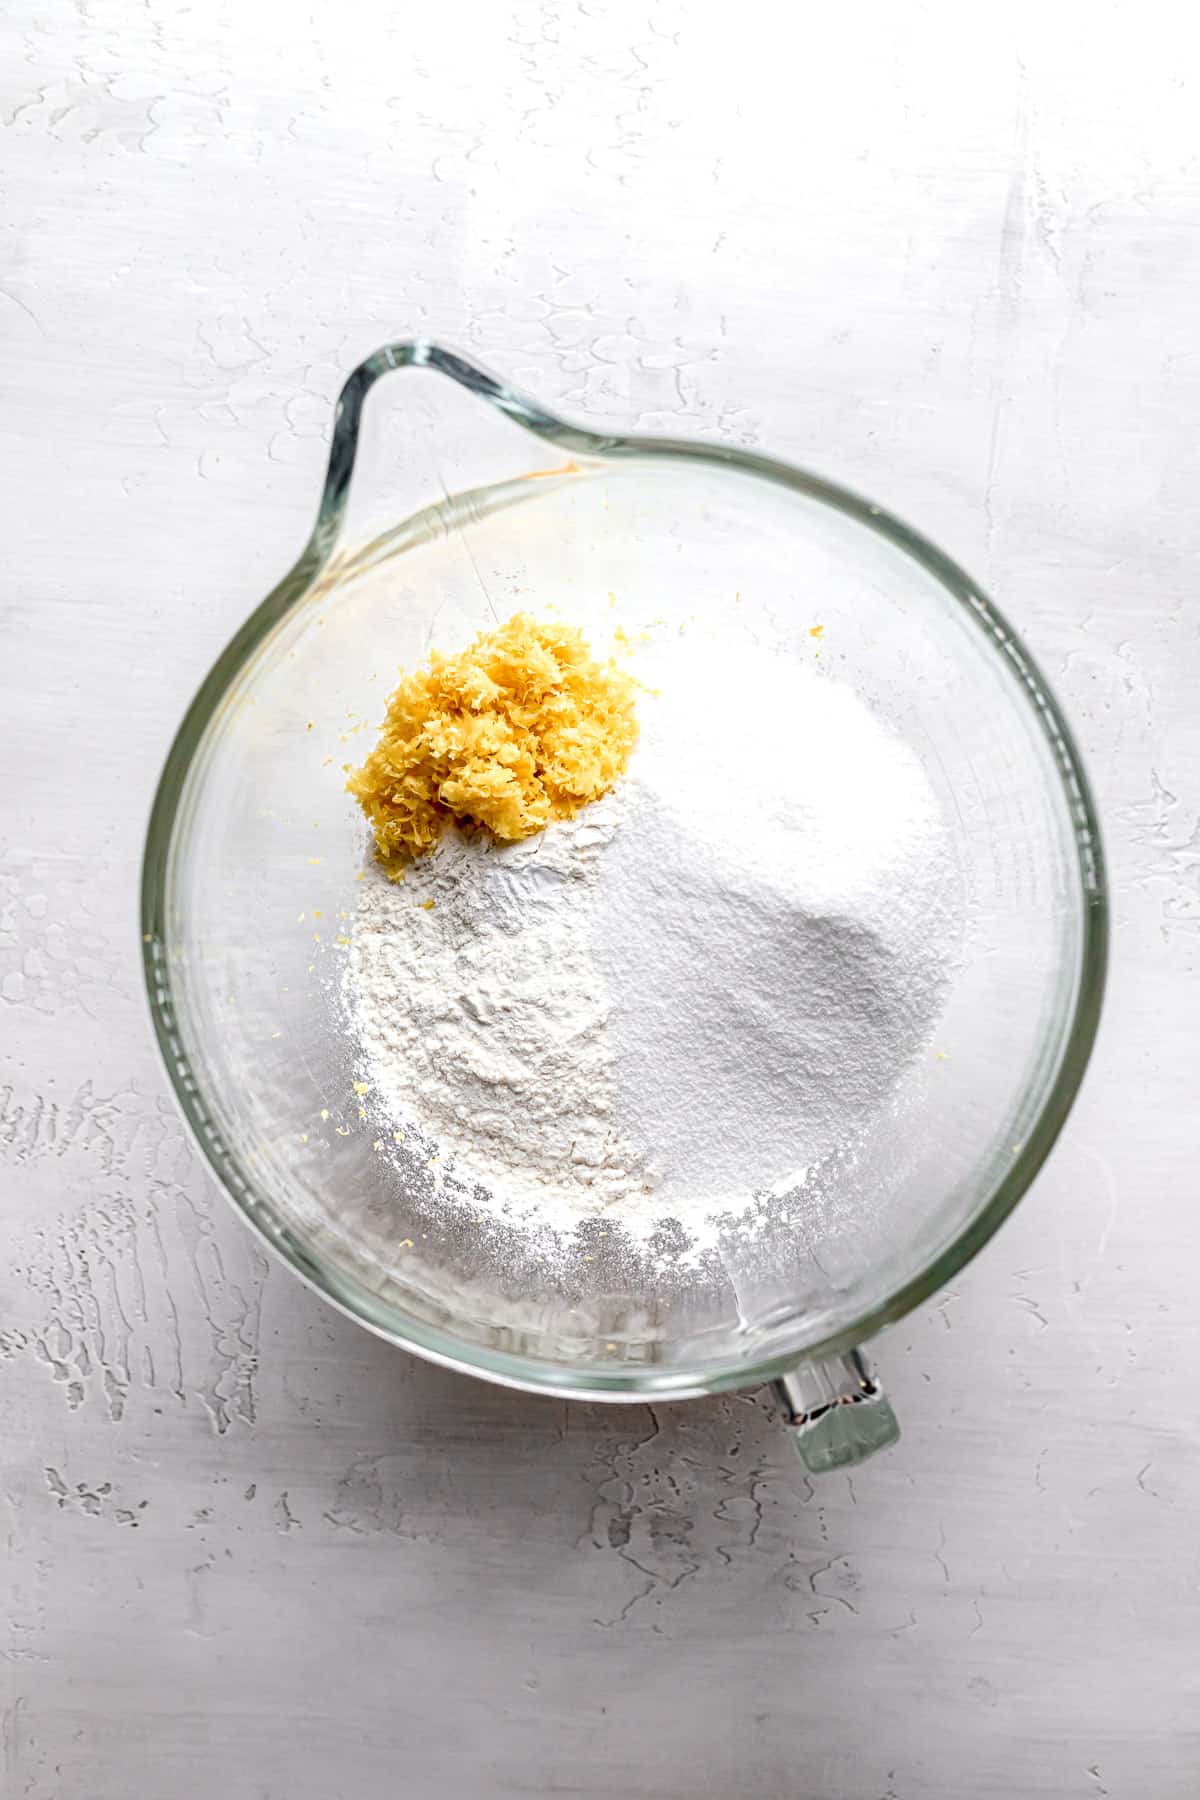 dry ingredients for cake in glass bowl.